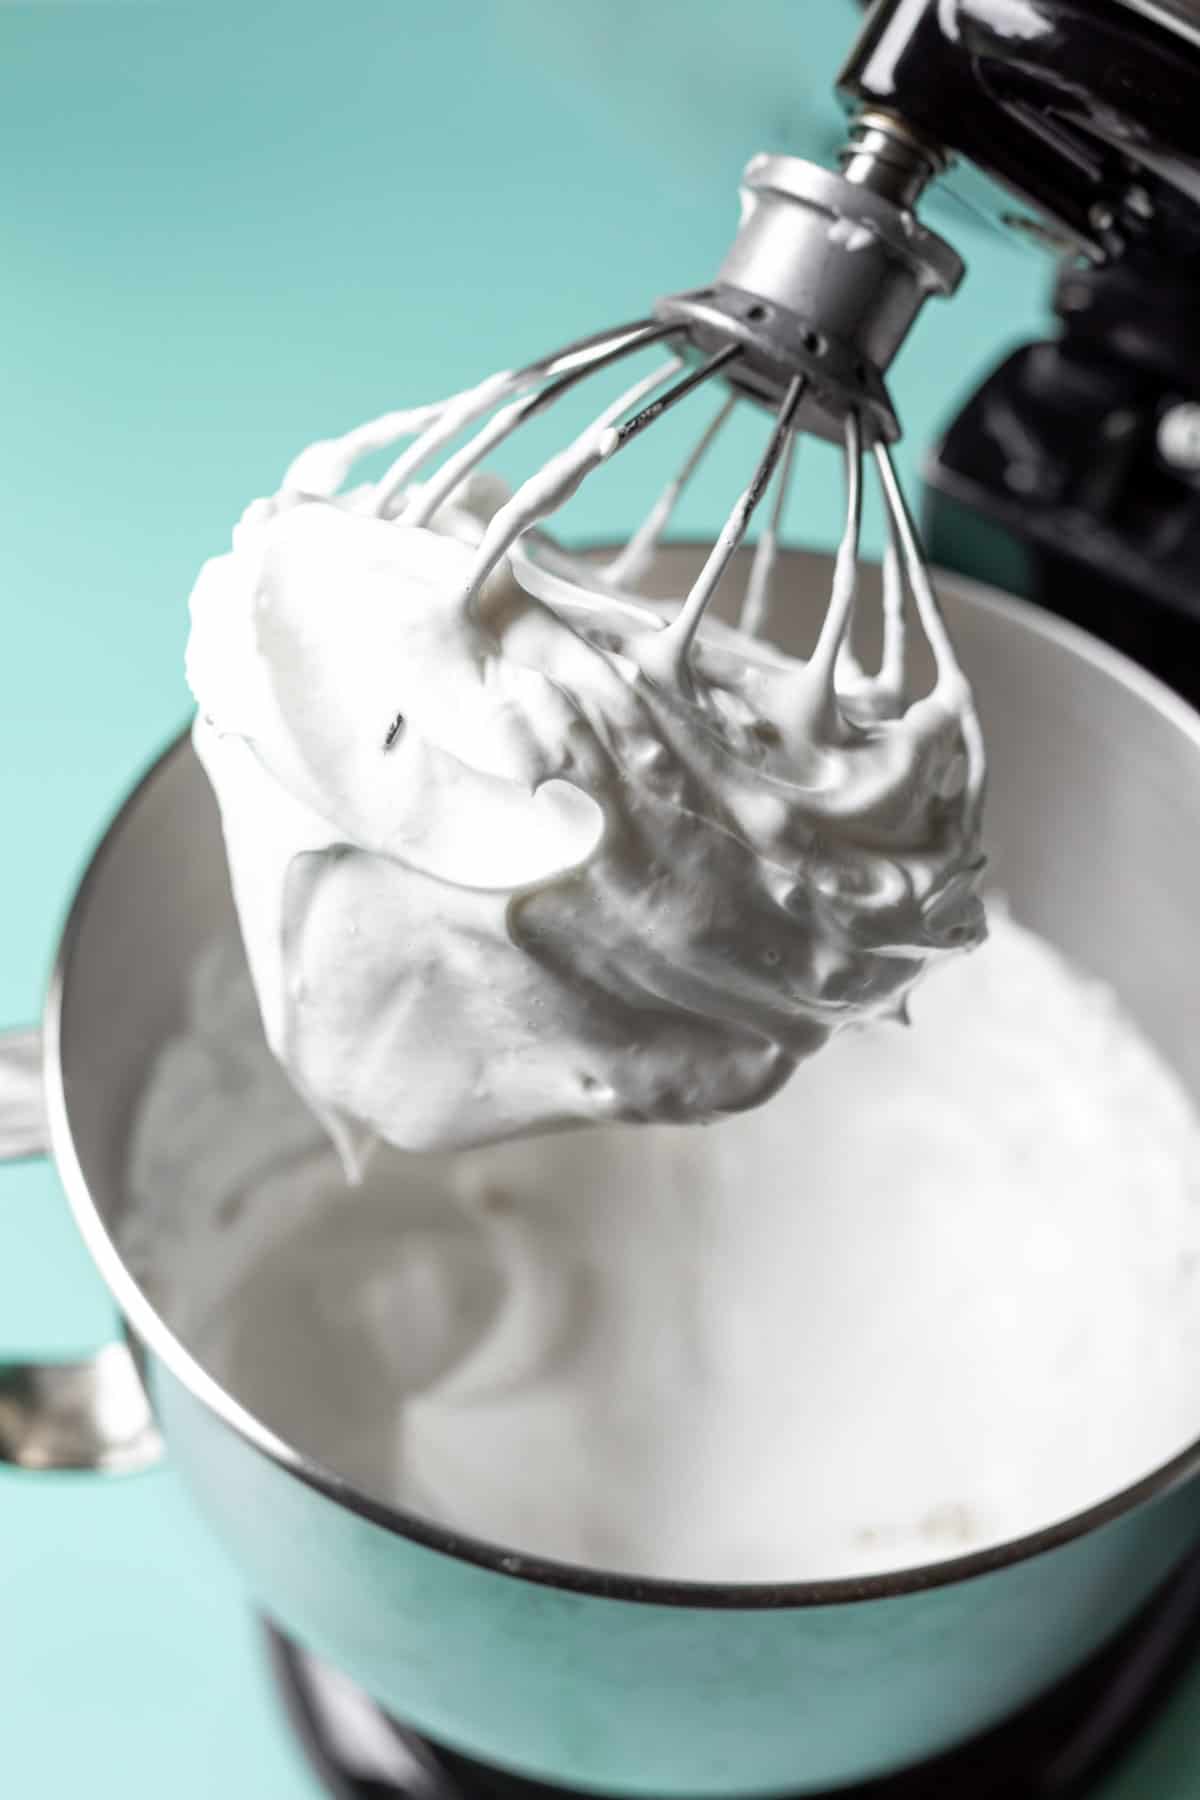 Vegan whipped cream clinging to the whisk of a mixer against an aqua blue background.